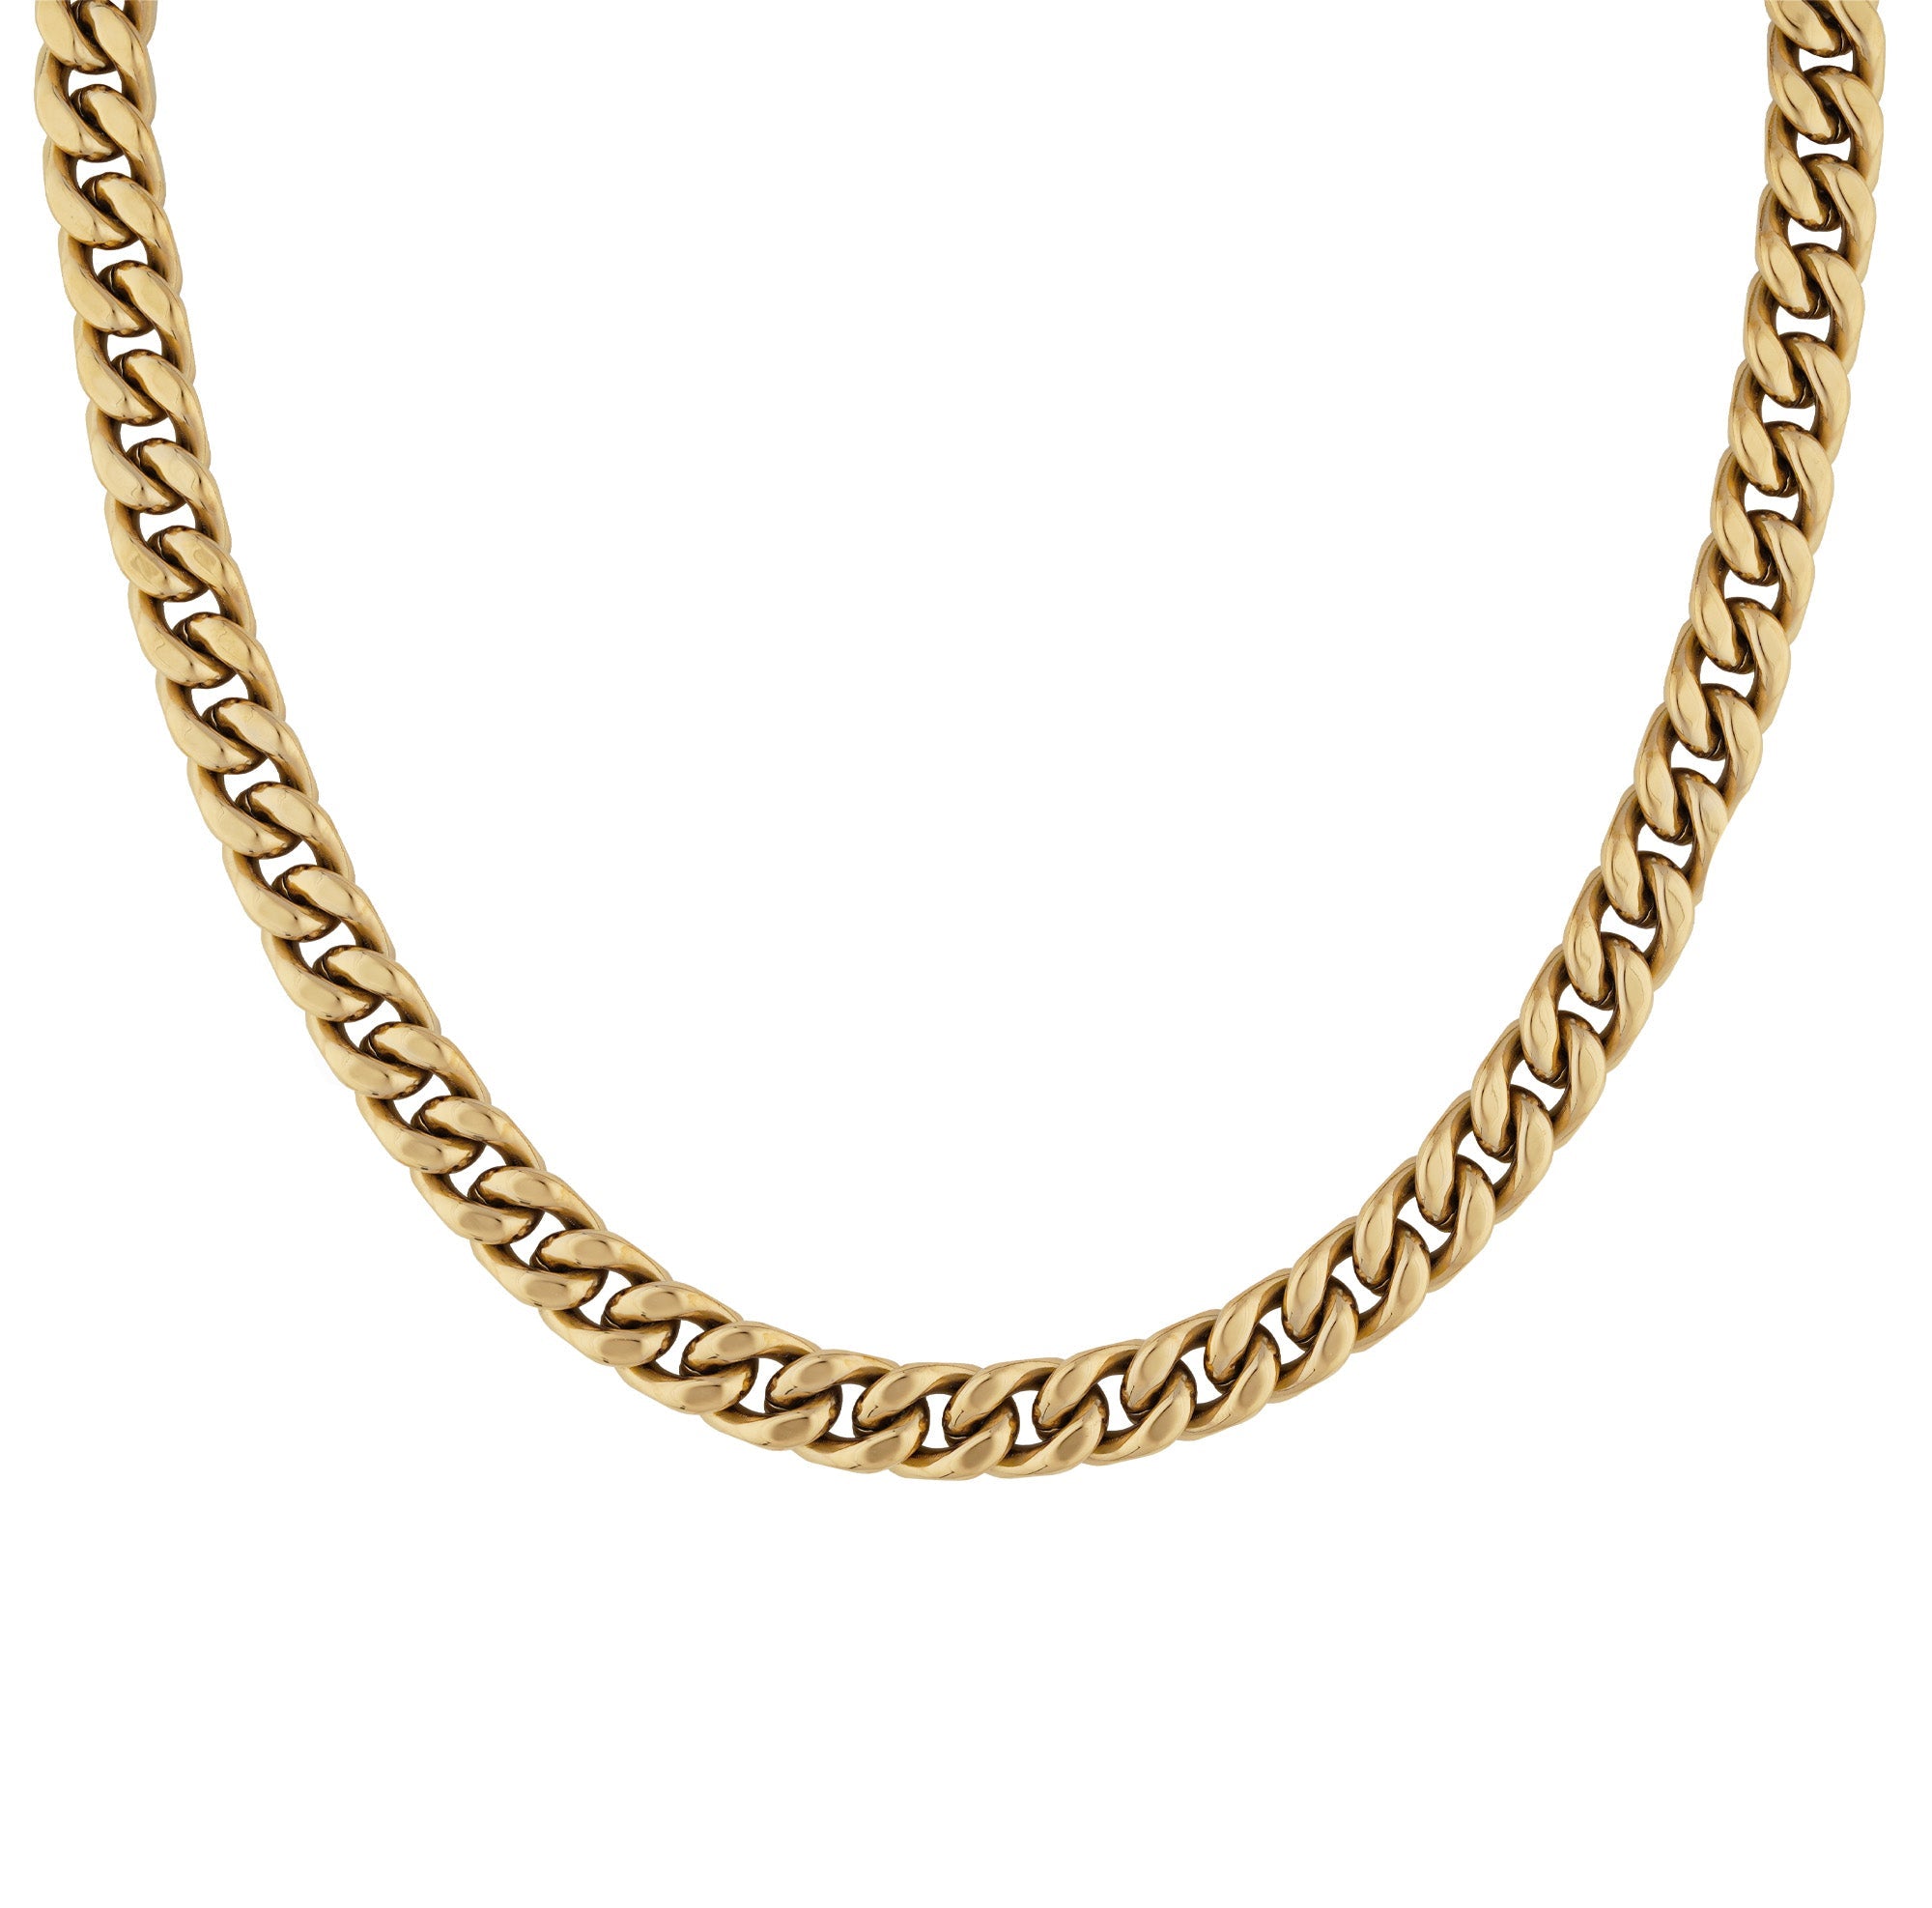 Cass women's necklace by Five Jwlry, designed with a 10mm tightly woven Cuban link chain in a gold hue, crafted from water-resistant 316L stainless steel. Available in sizes 40cm, 45cm and 50cm. Hypoallergenic and accompanied by a 2-year warranty.